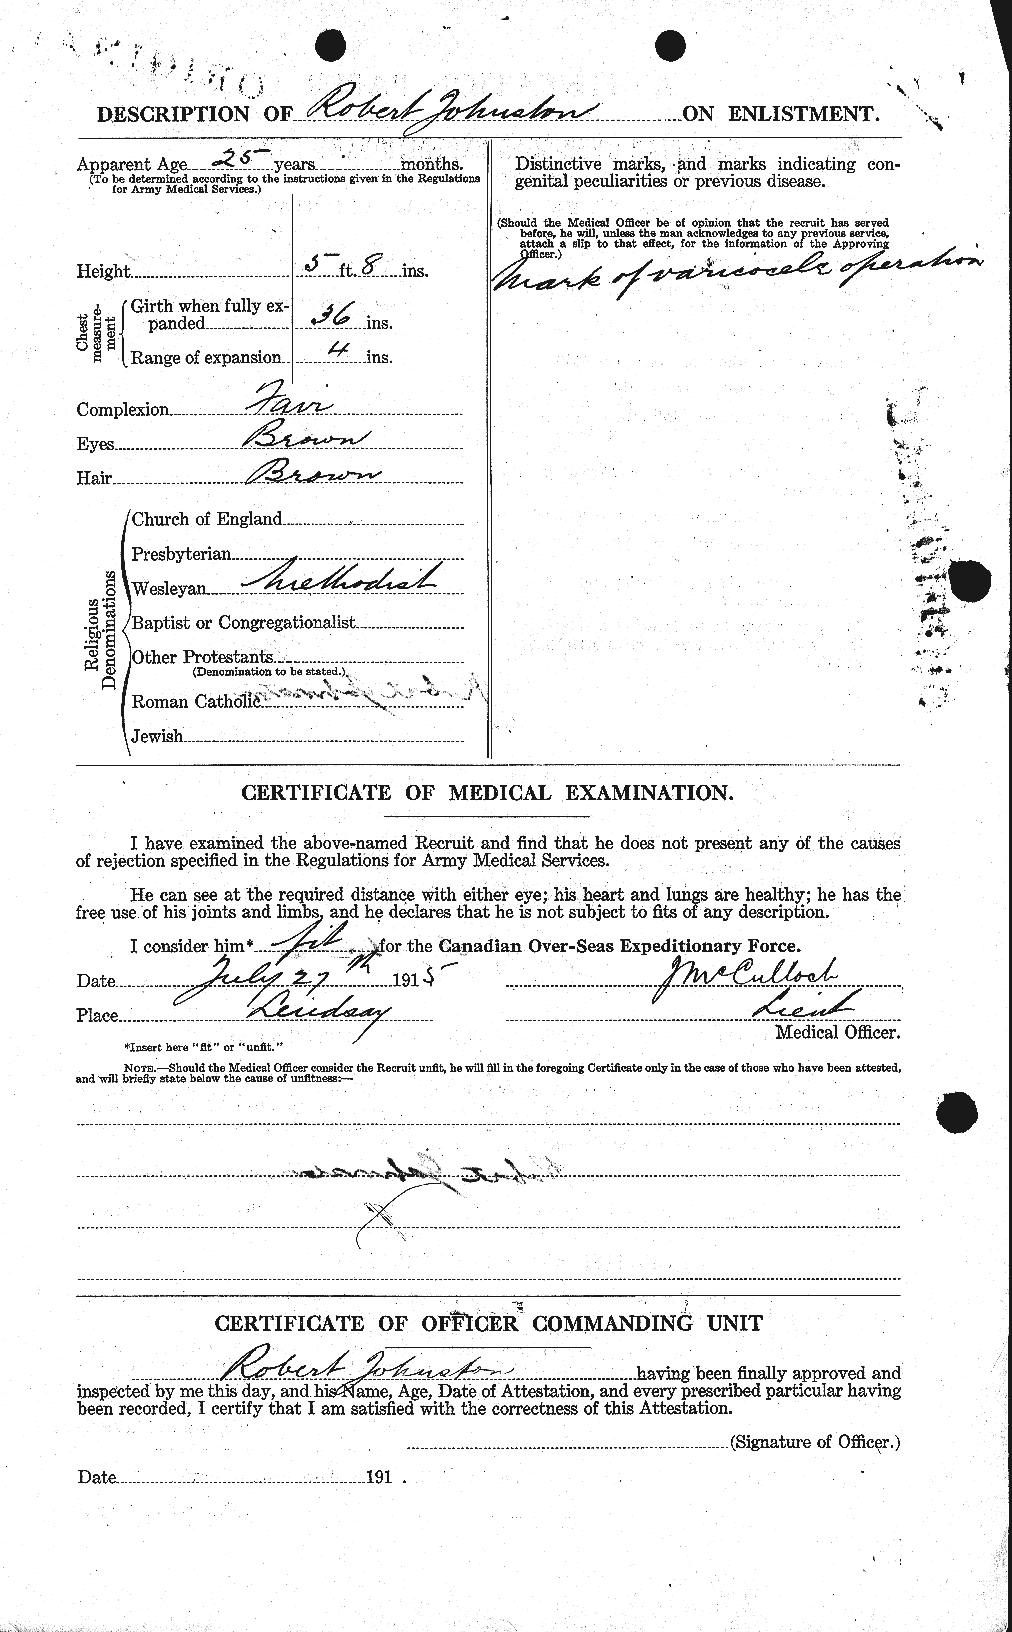 Personnel Records of the First World War - CEF 426992b